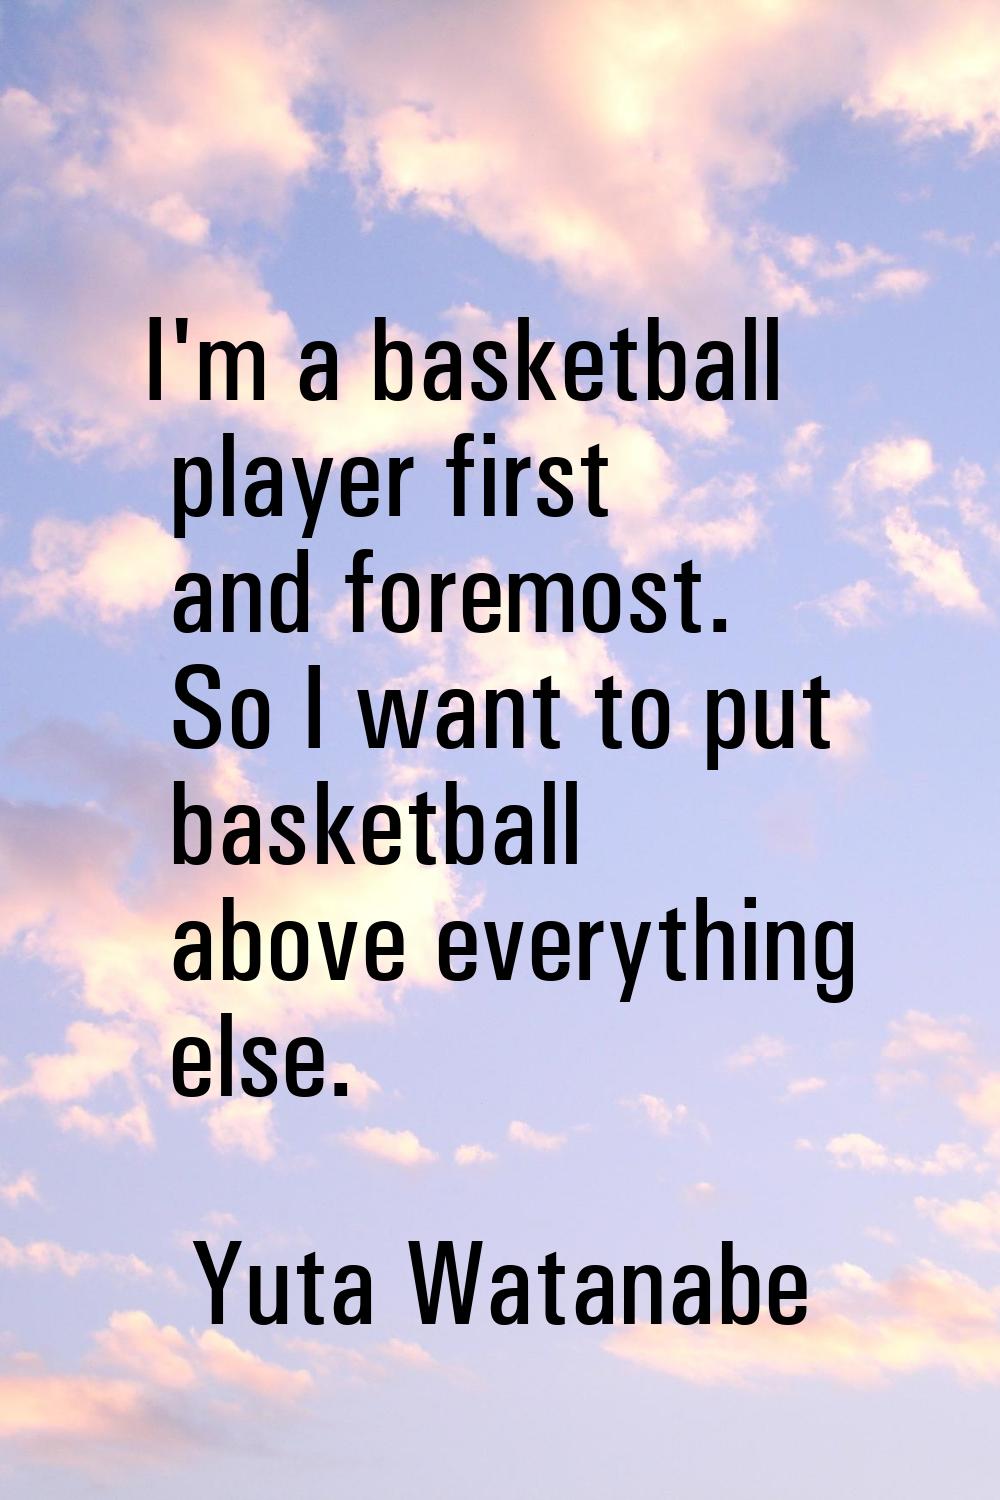 I'm a basketball player first and foremost. So I want to put basketball above everything else.